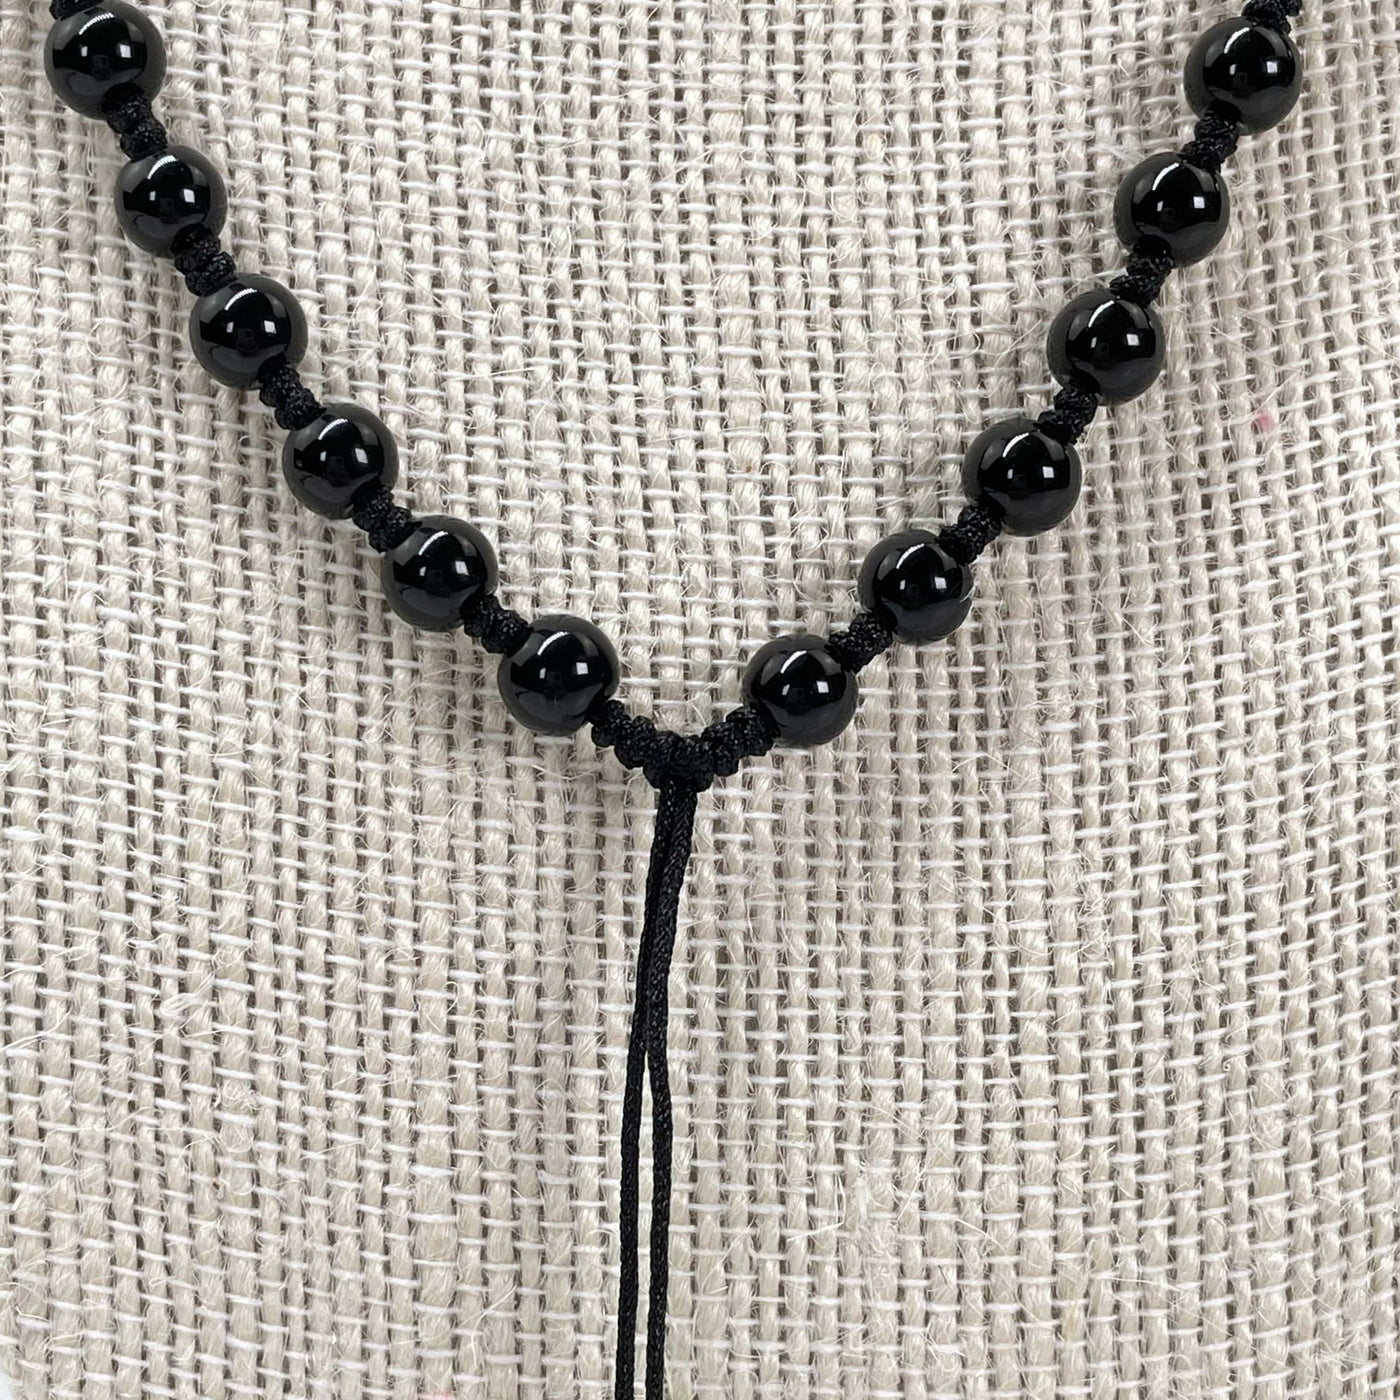 close up of center string without pendant